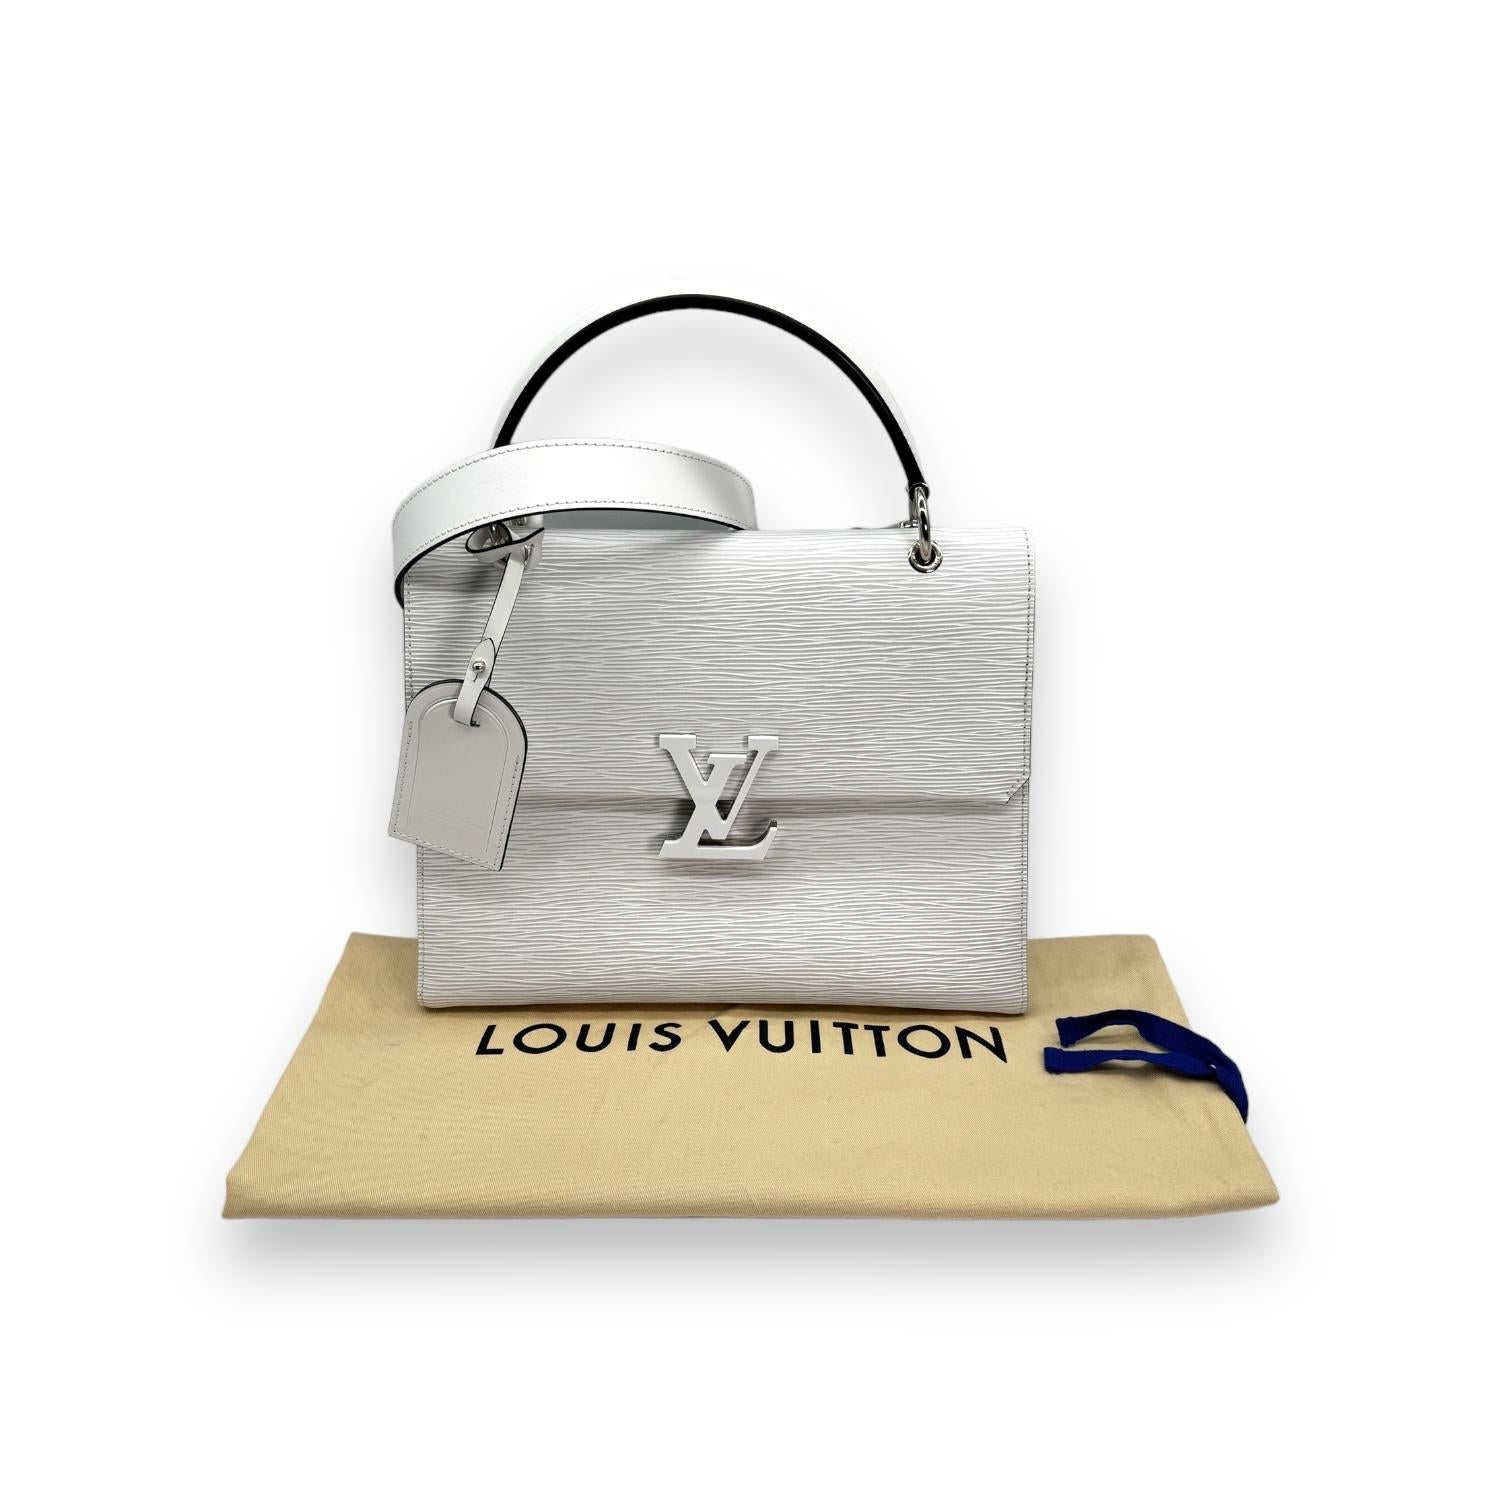 Indulge in luxury with the Louis Vuitton White Epi Grenelle MM Handbag. Crafted with Epi Grained White Leather and finished with silver-tone hardware, this handbag exudes elegance and sophistication. Featuring a spacious interior with multiple